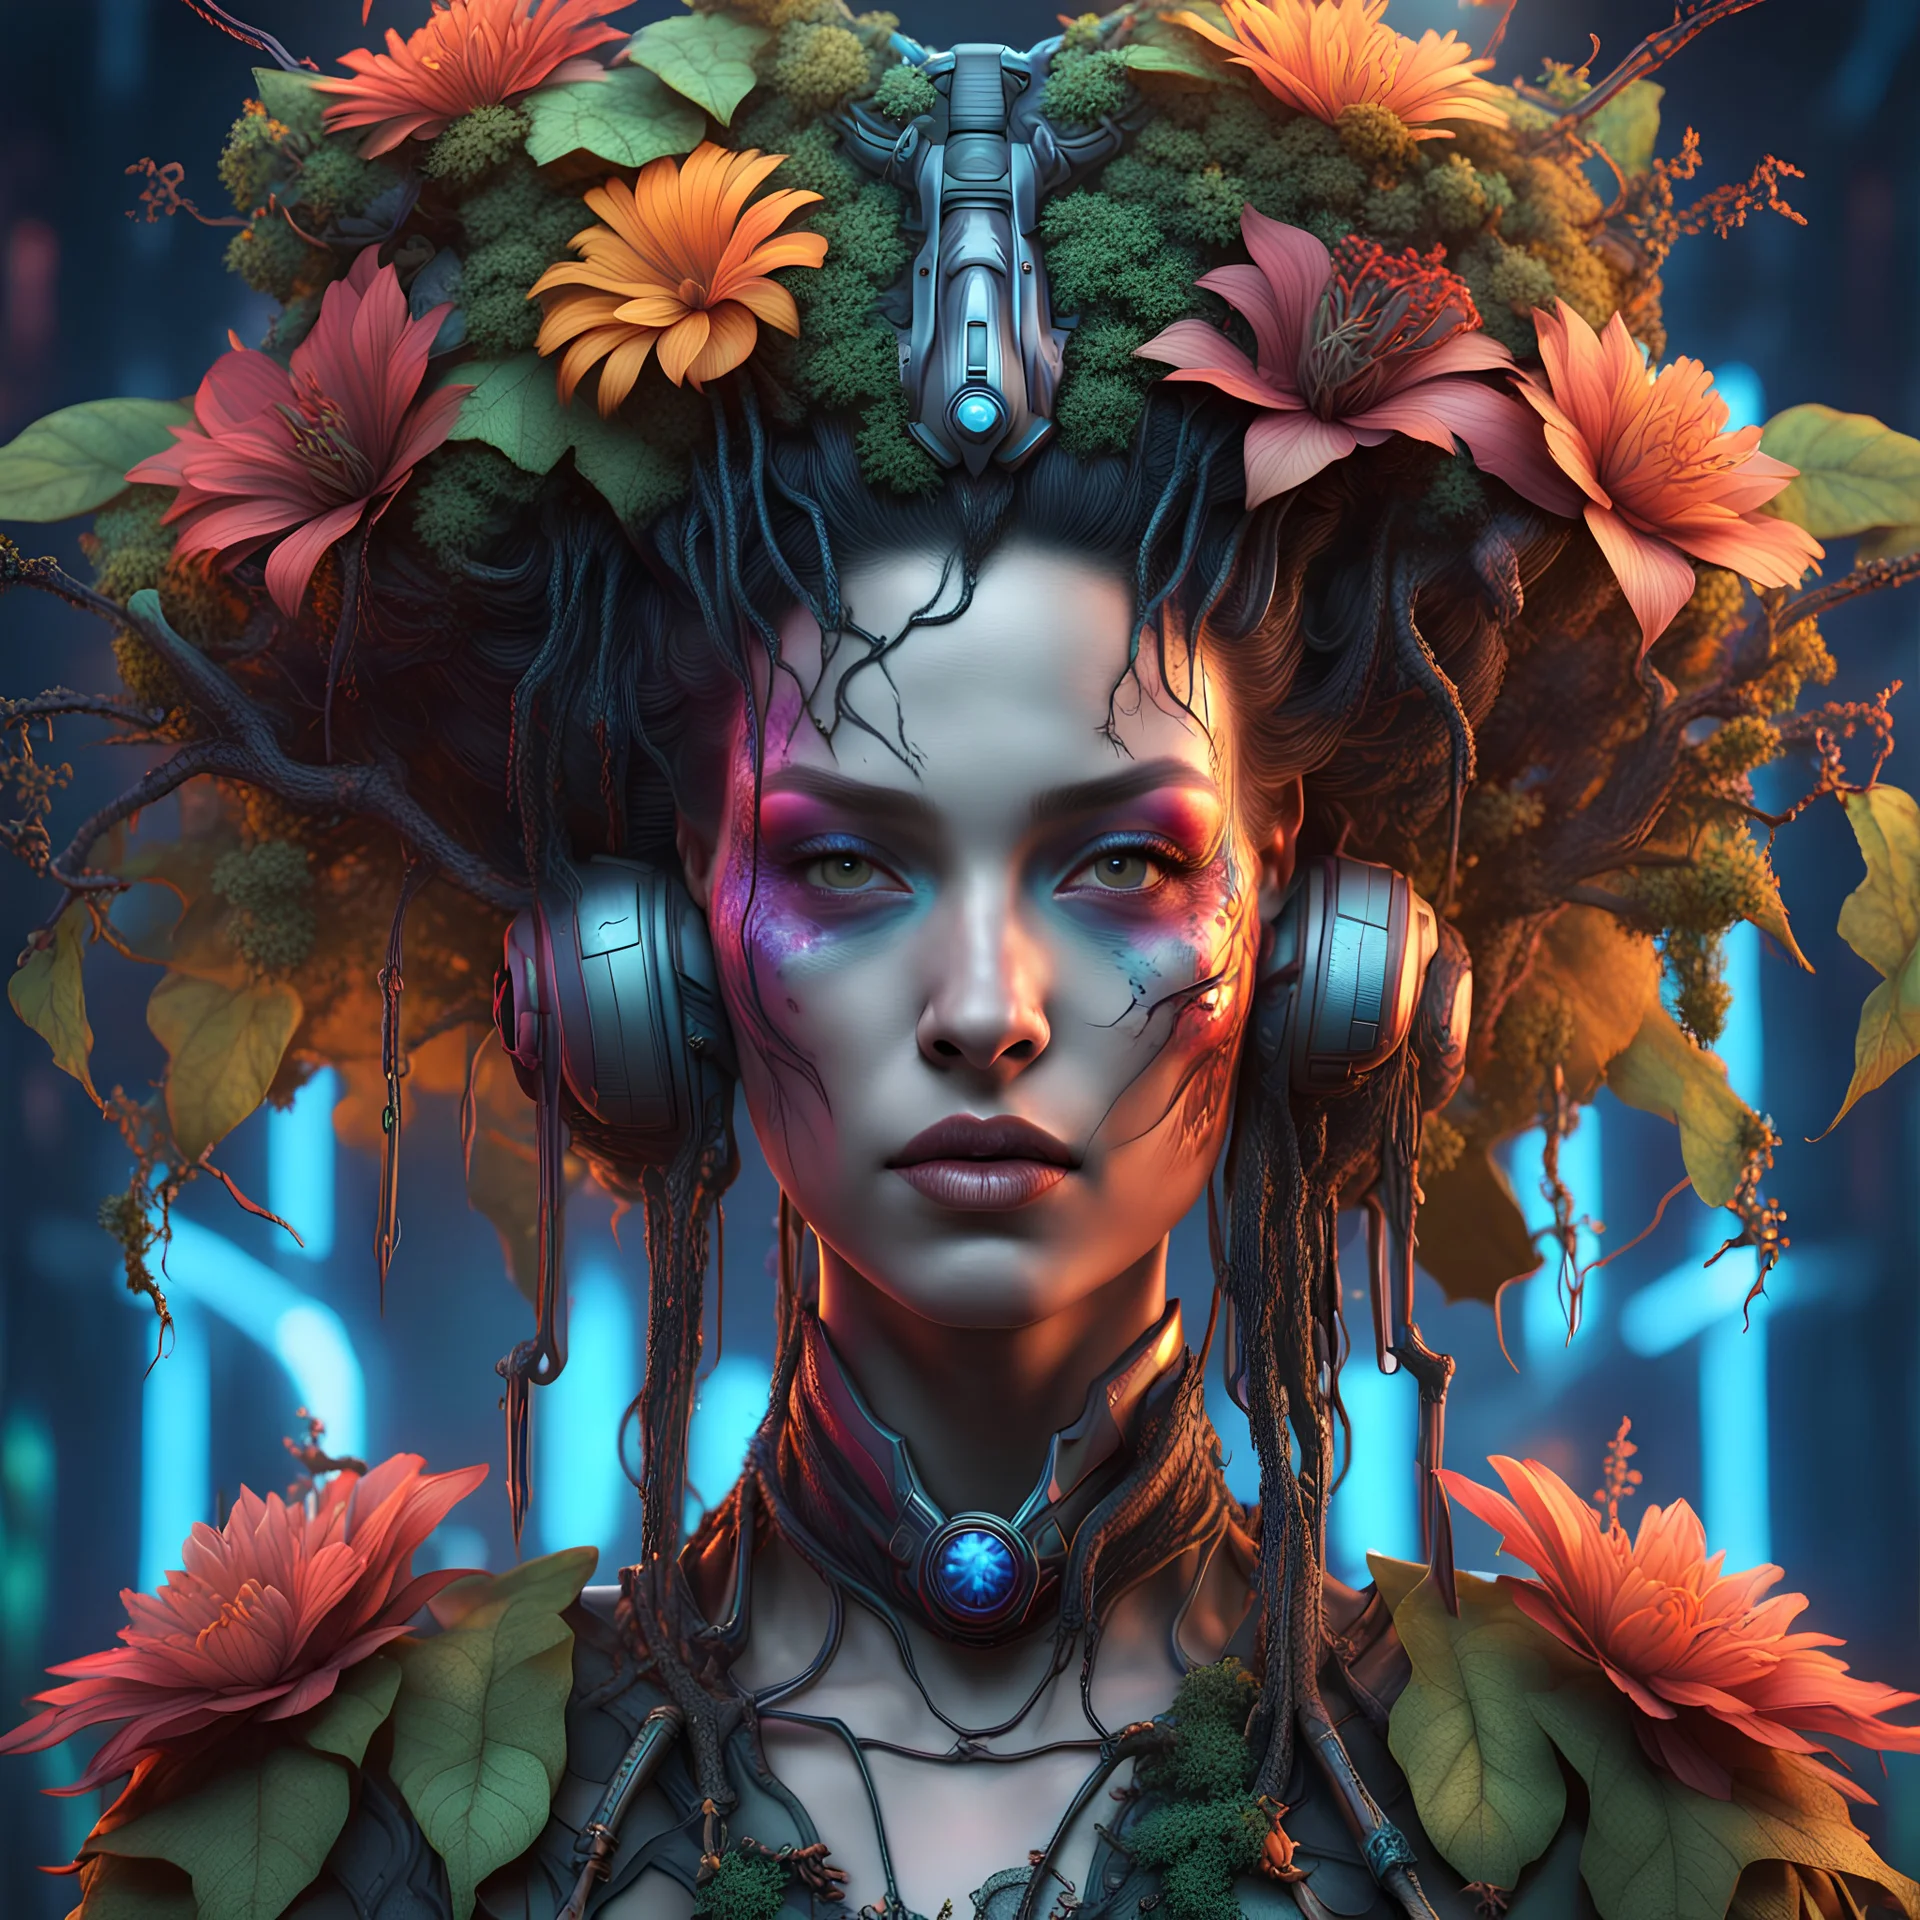 Expressively detailed and intricate 3d rendering of a hyperrealistic: woman, cyberpunk plants and flowers, neon, vines, flying insect, front view, dripping colorful paint, tribalism, gothic, shamanism, cosmic fractals, dystopian, dendritic, artstation: award-winning: professional portrait: atmospheric: commanding: fantastical: clarity: 16k: ultra quality: striking: brilliance: stunning colors: amazing depth